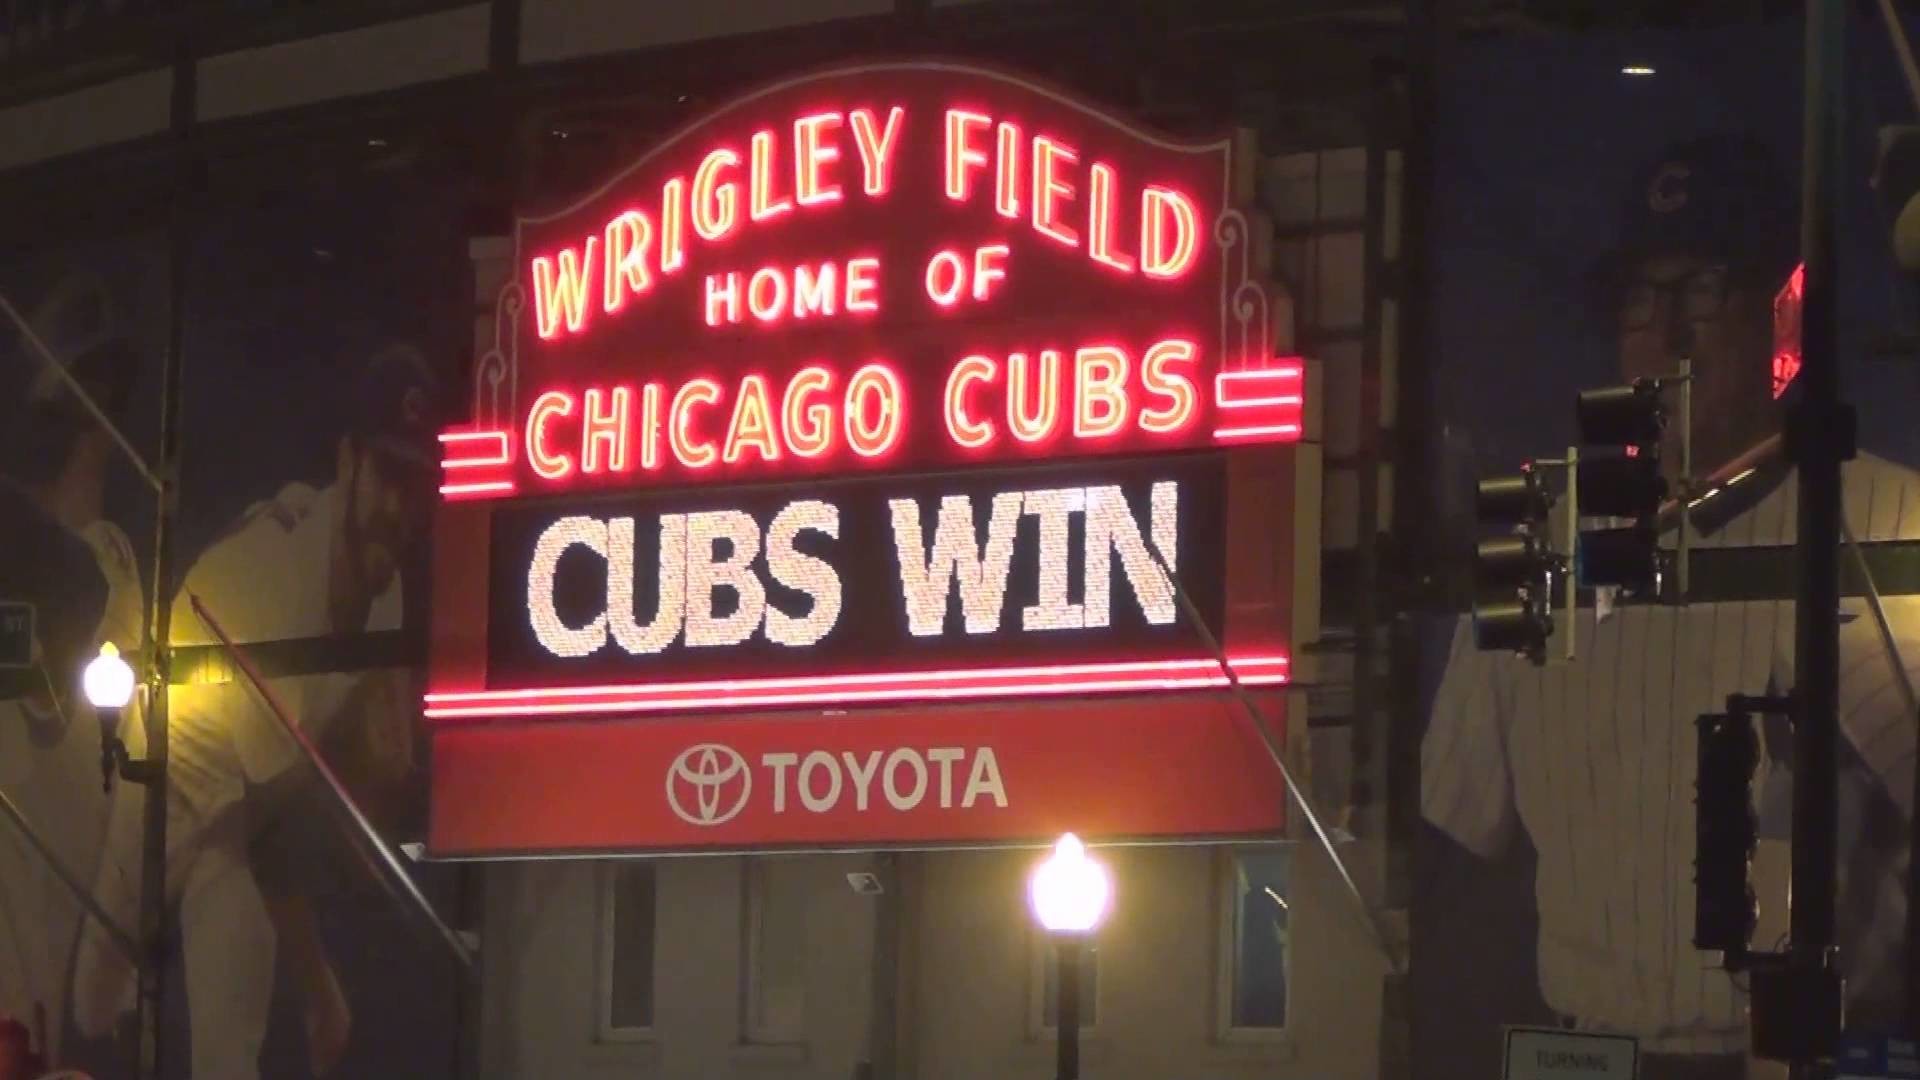 1920x1080 1st time Wrigley Field Marquee flashes “CUBS WIN” for NLDS Champs!  Wrigleyville Erupts 10/13/2015